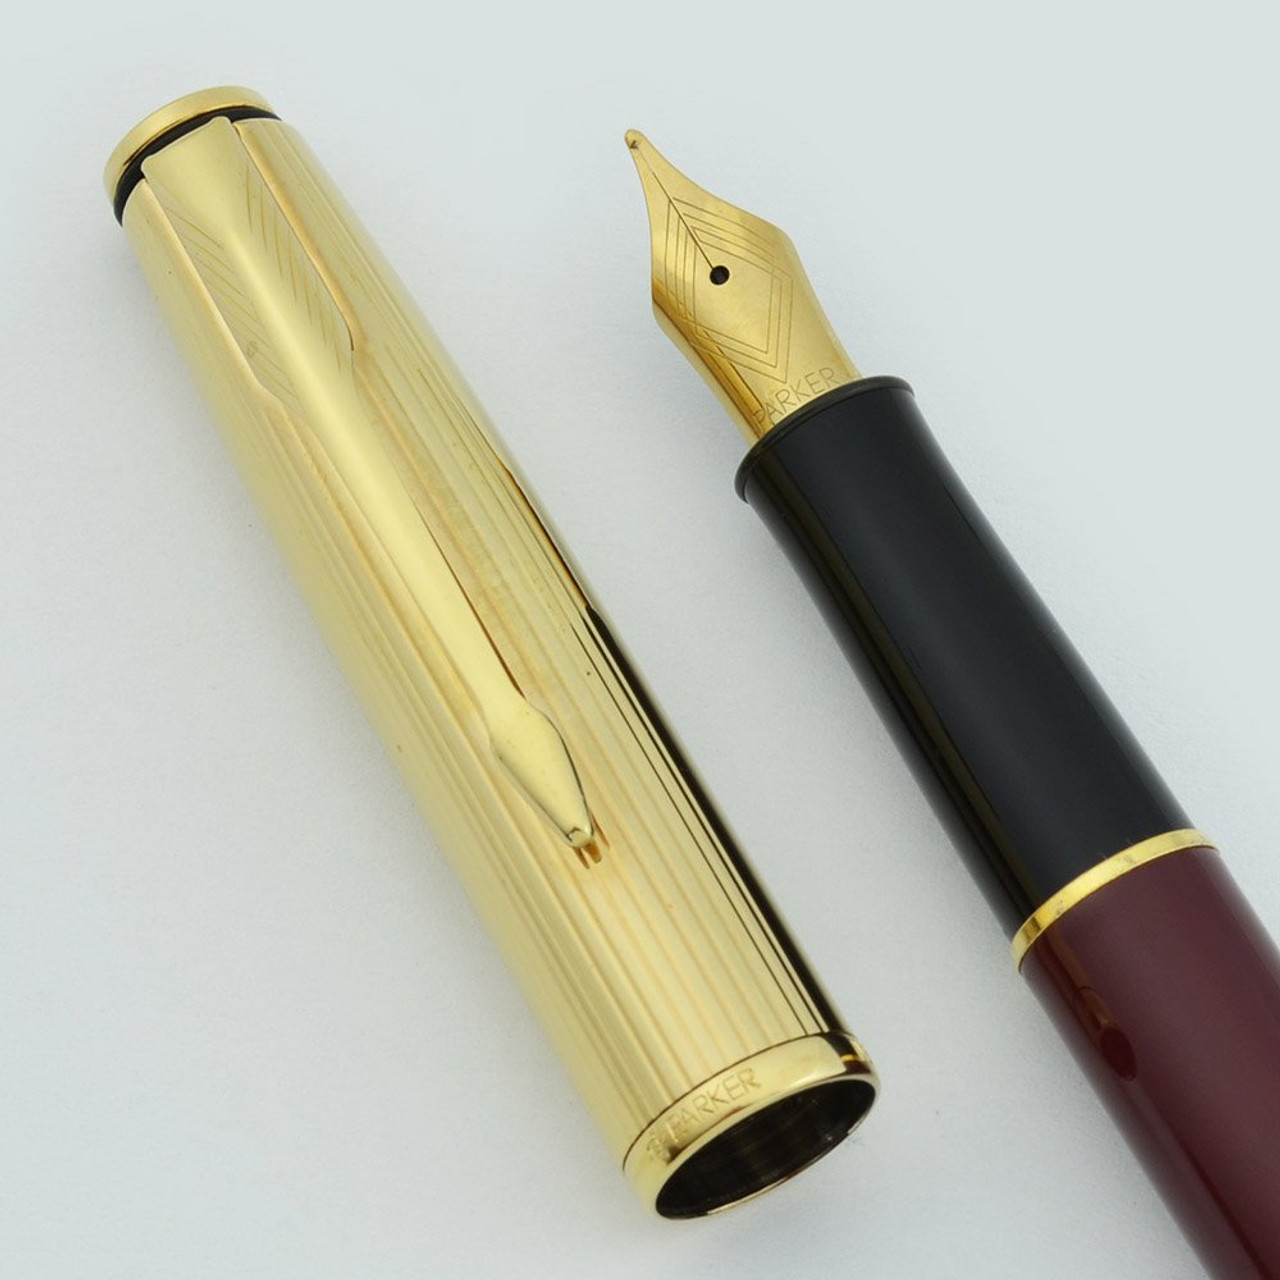 Parker Insignia Fountain Pen - Red with Gold Cap, Medium Nib (Near Mint, Works Well)